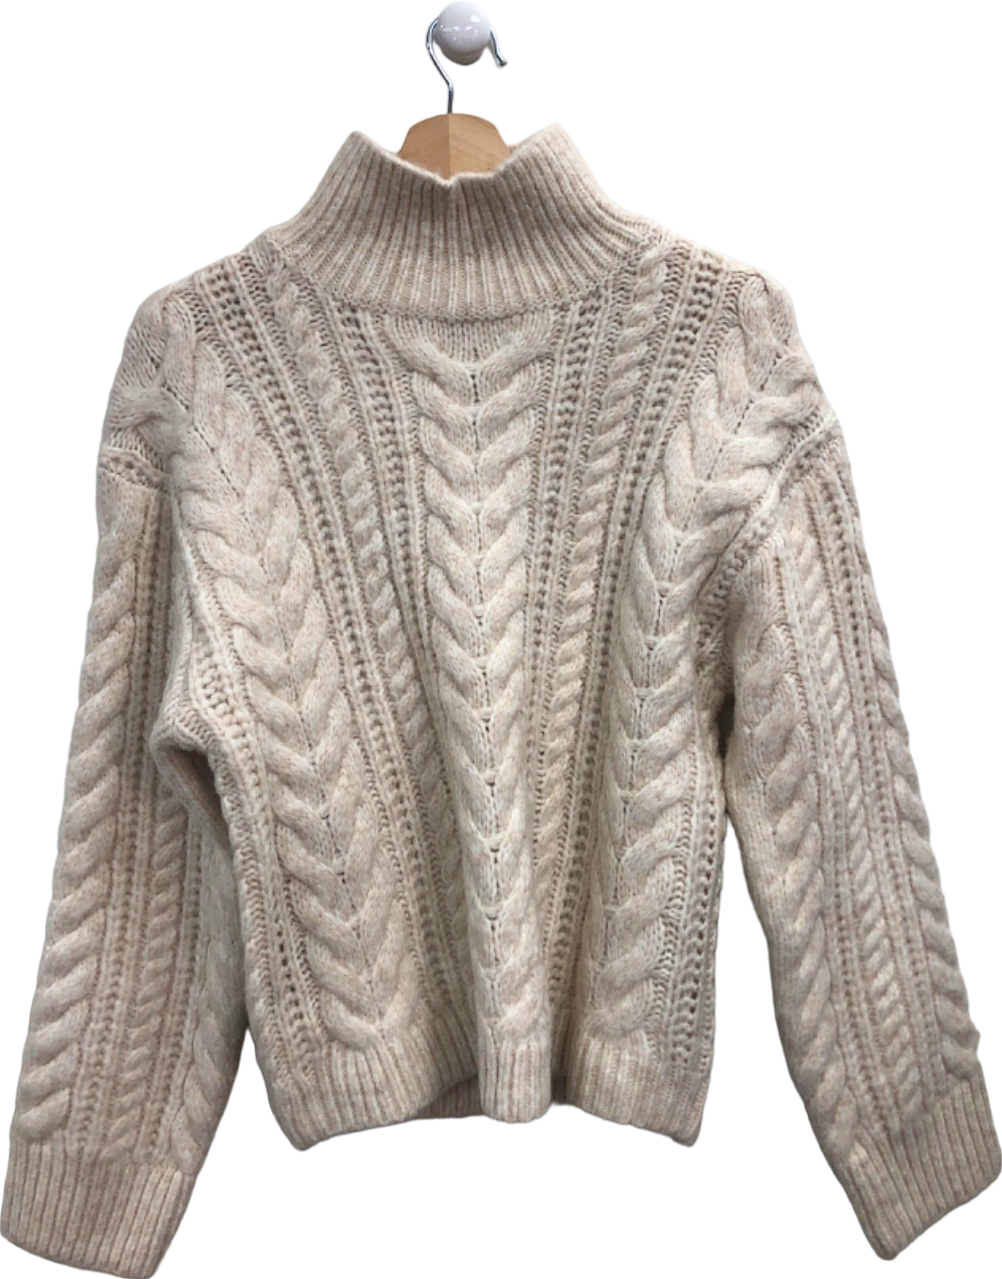 H&M Beige Cable Knit Turtleneck Sweater UK S